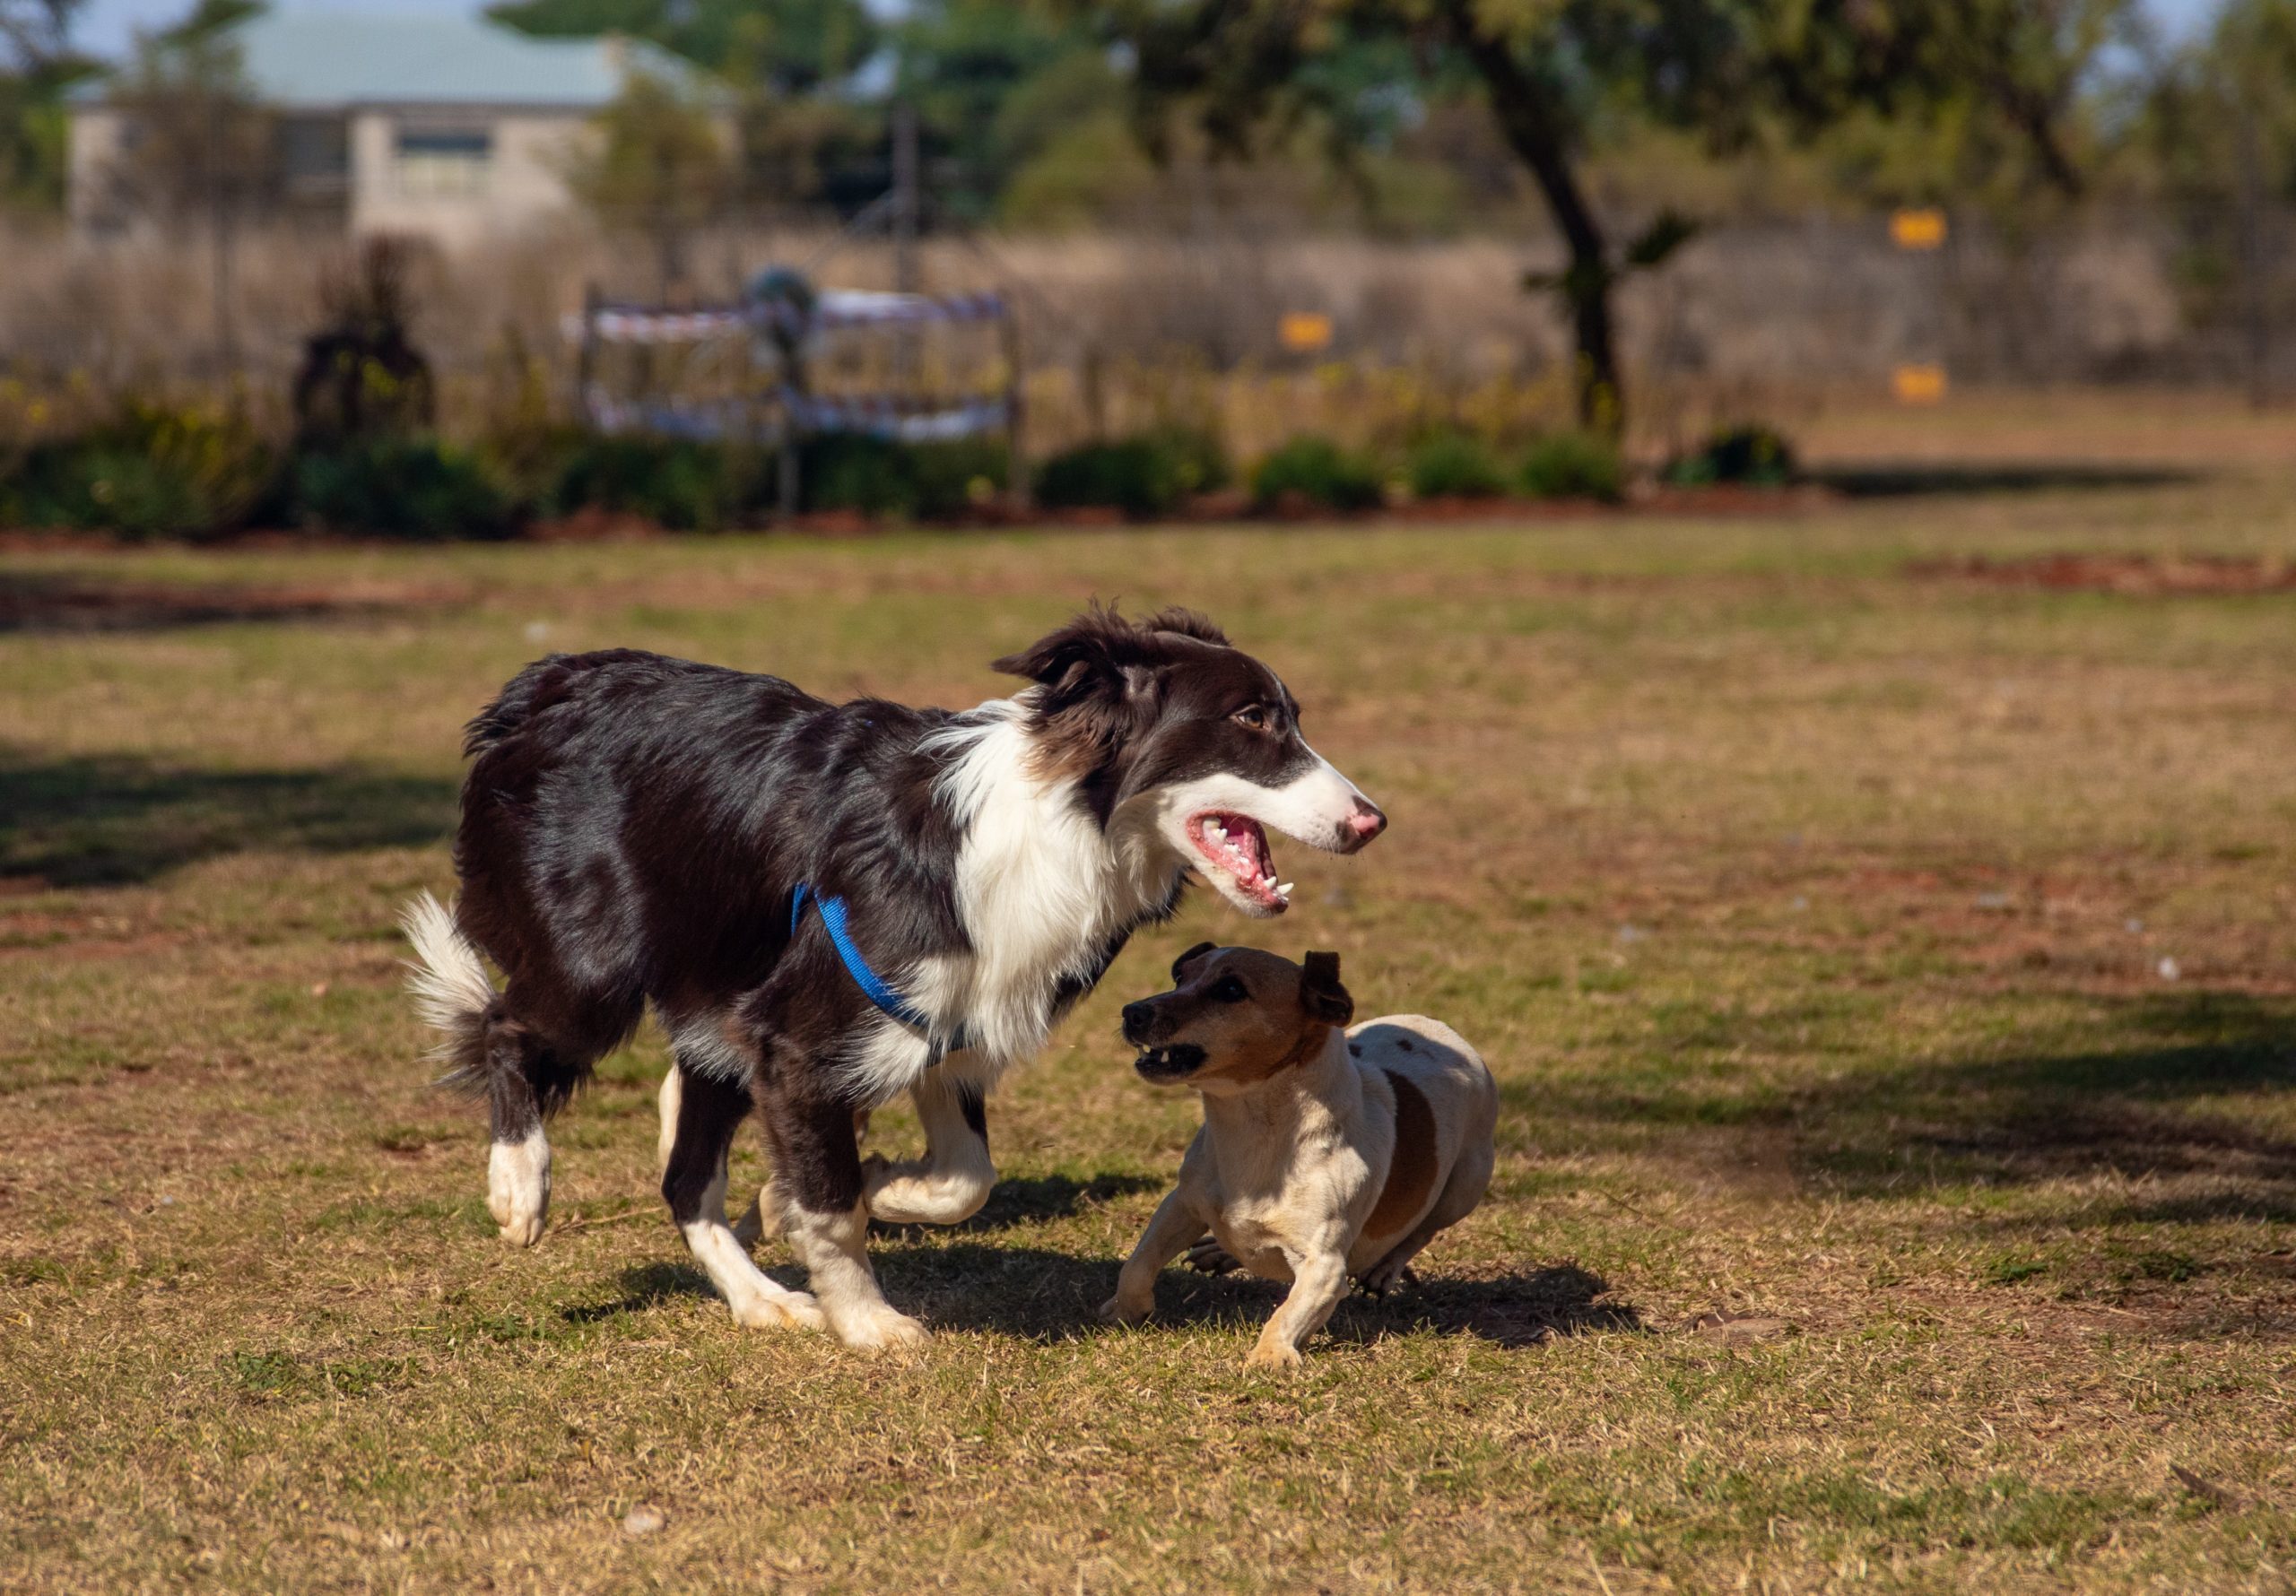 daycare dogs playing at dog park